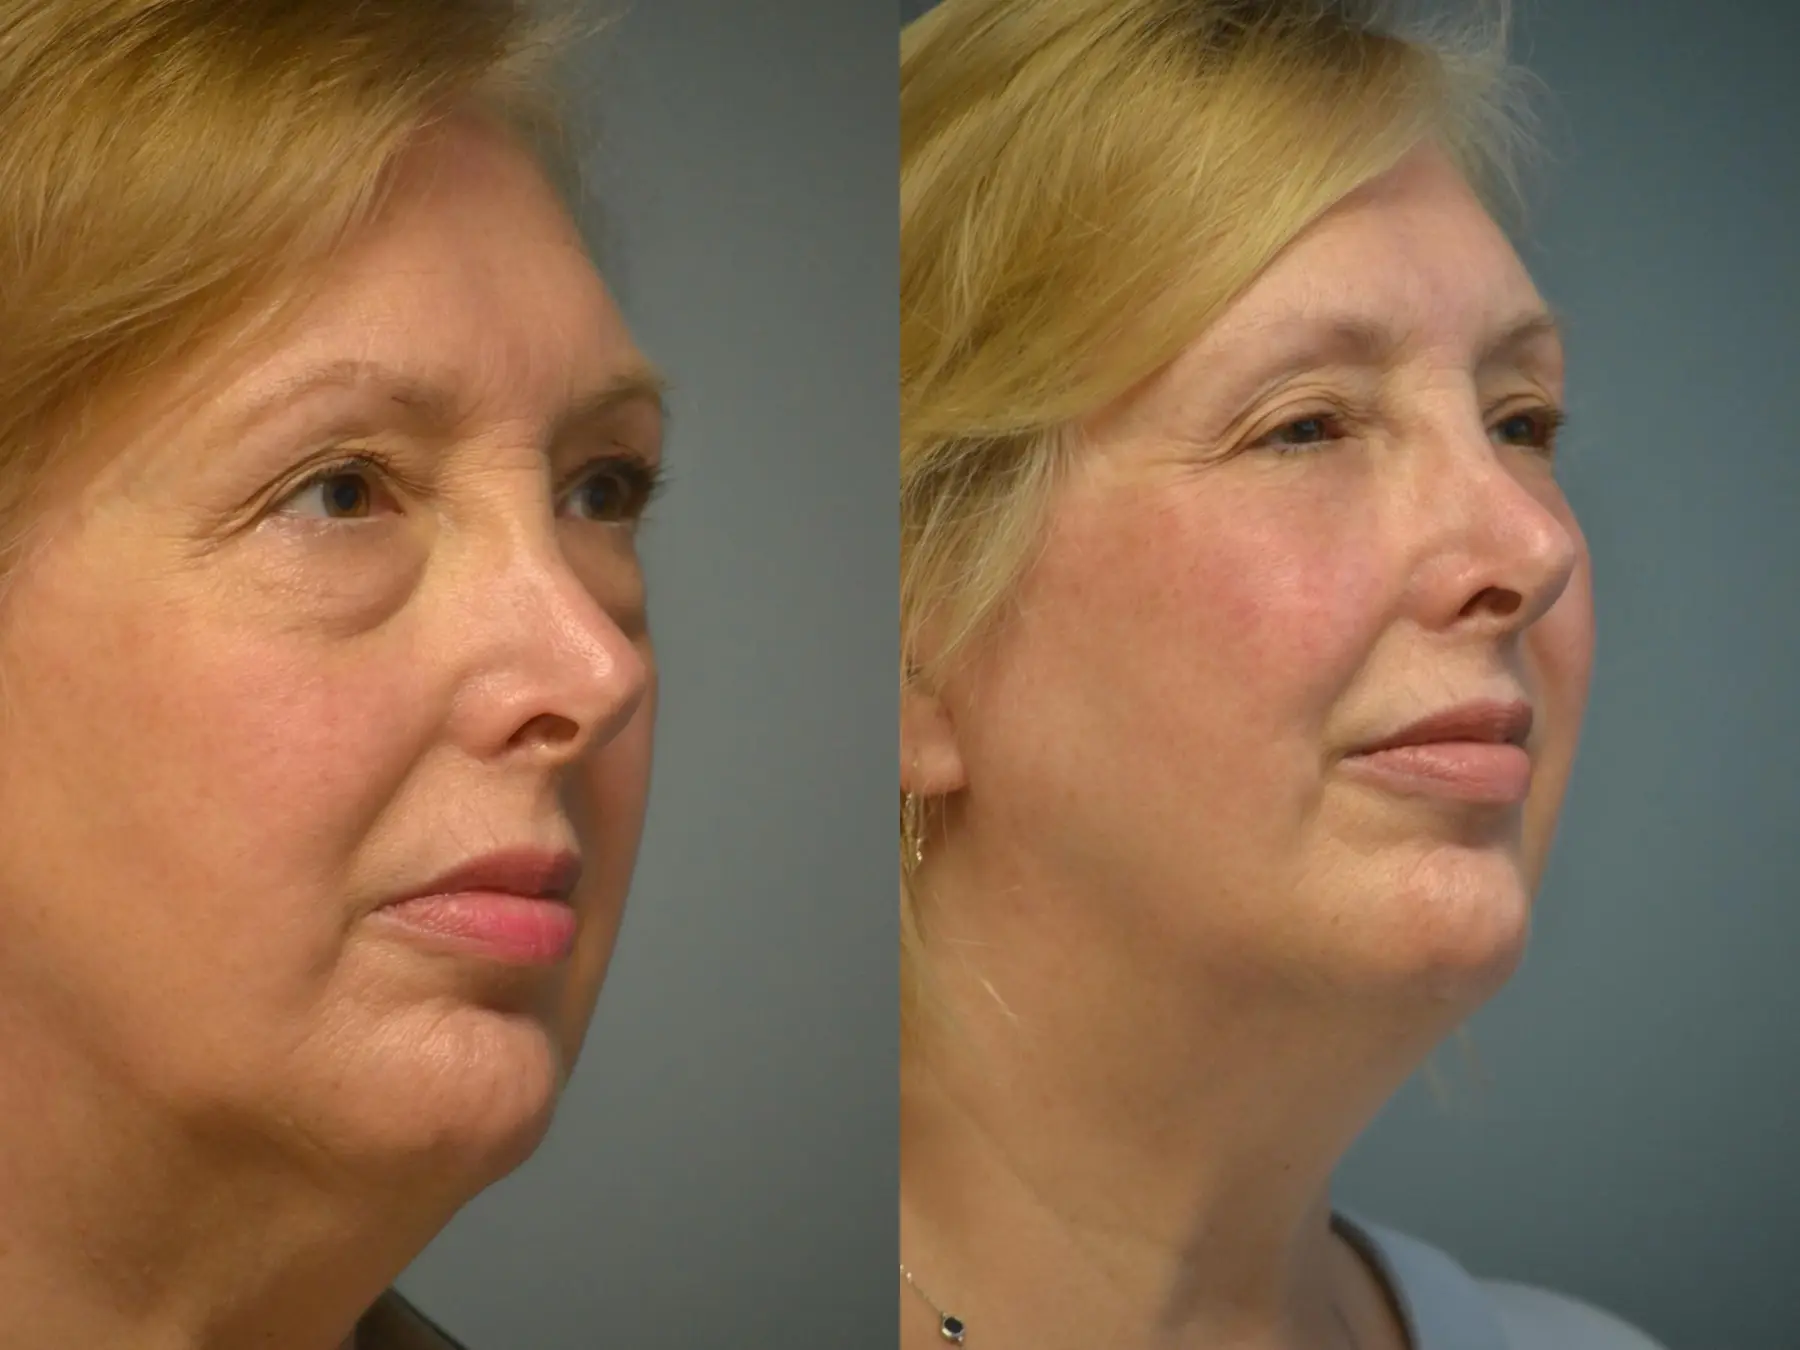 Fat Transfer - Face: Patient 1 - Before and After 3